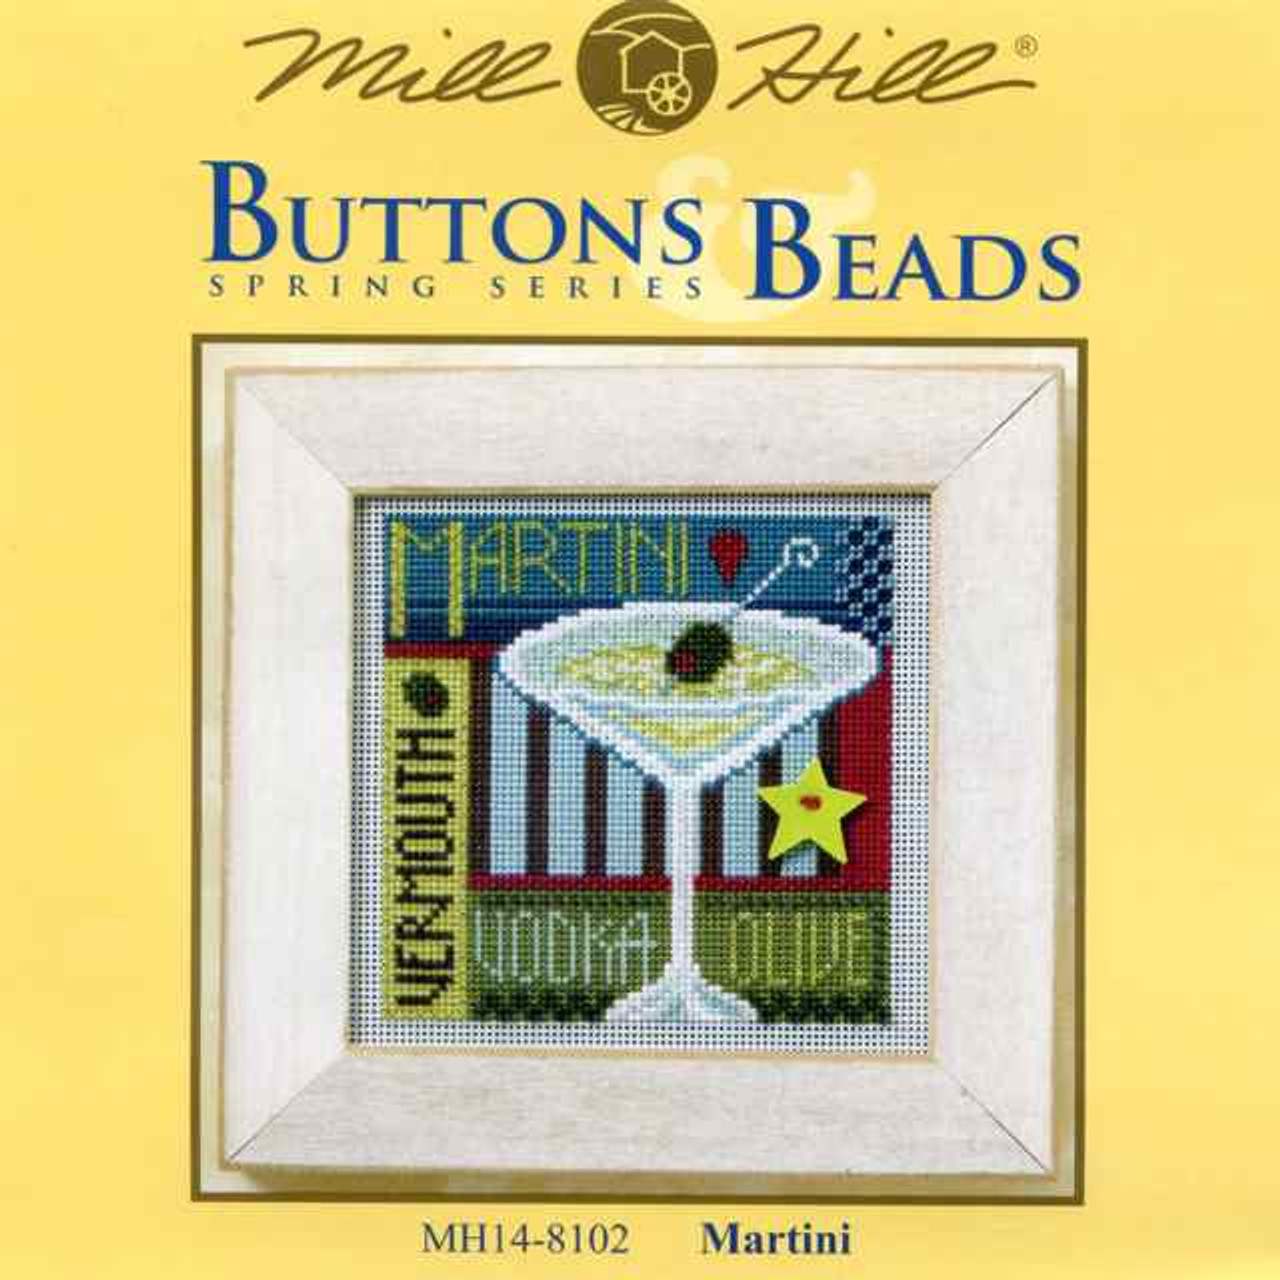 Martini Cross Stitch Kit Mill Hill 2008 Buttons & Beads Spring